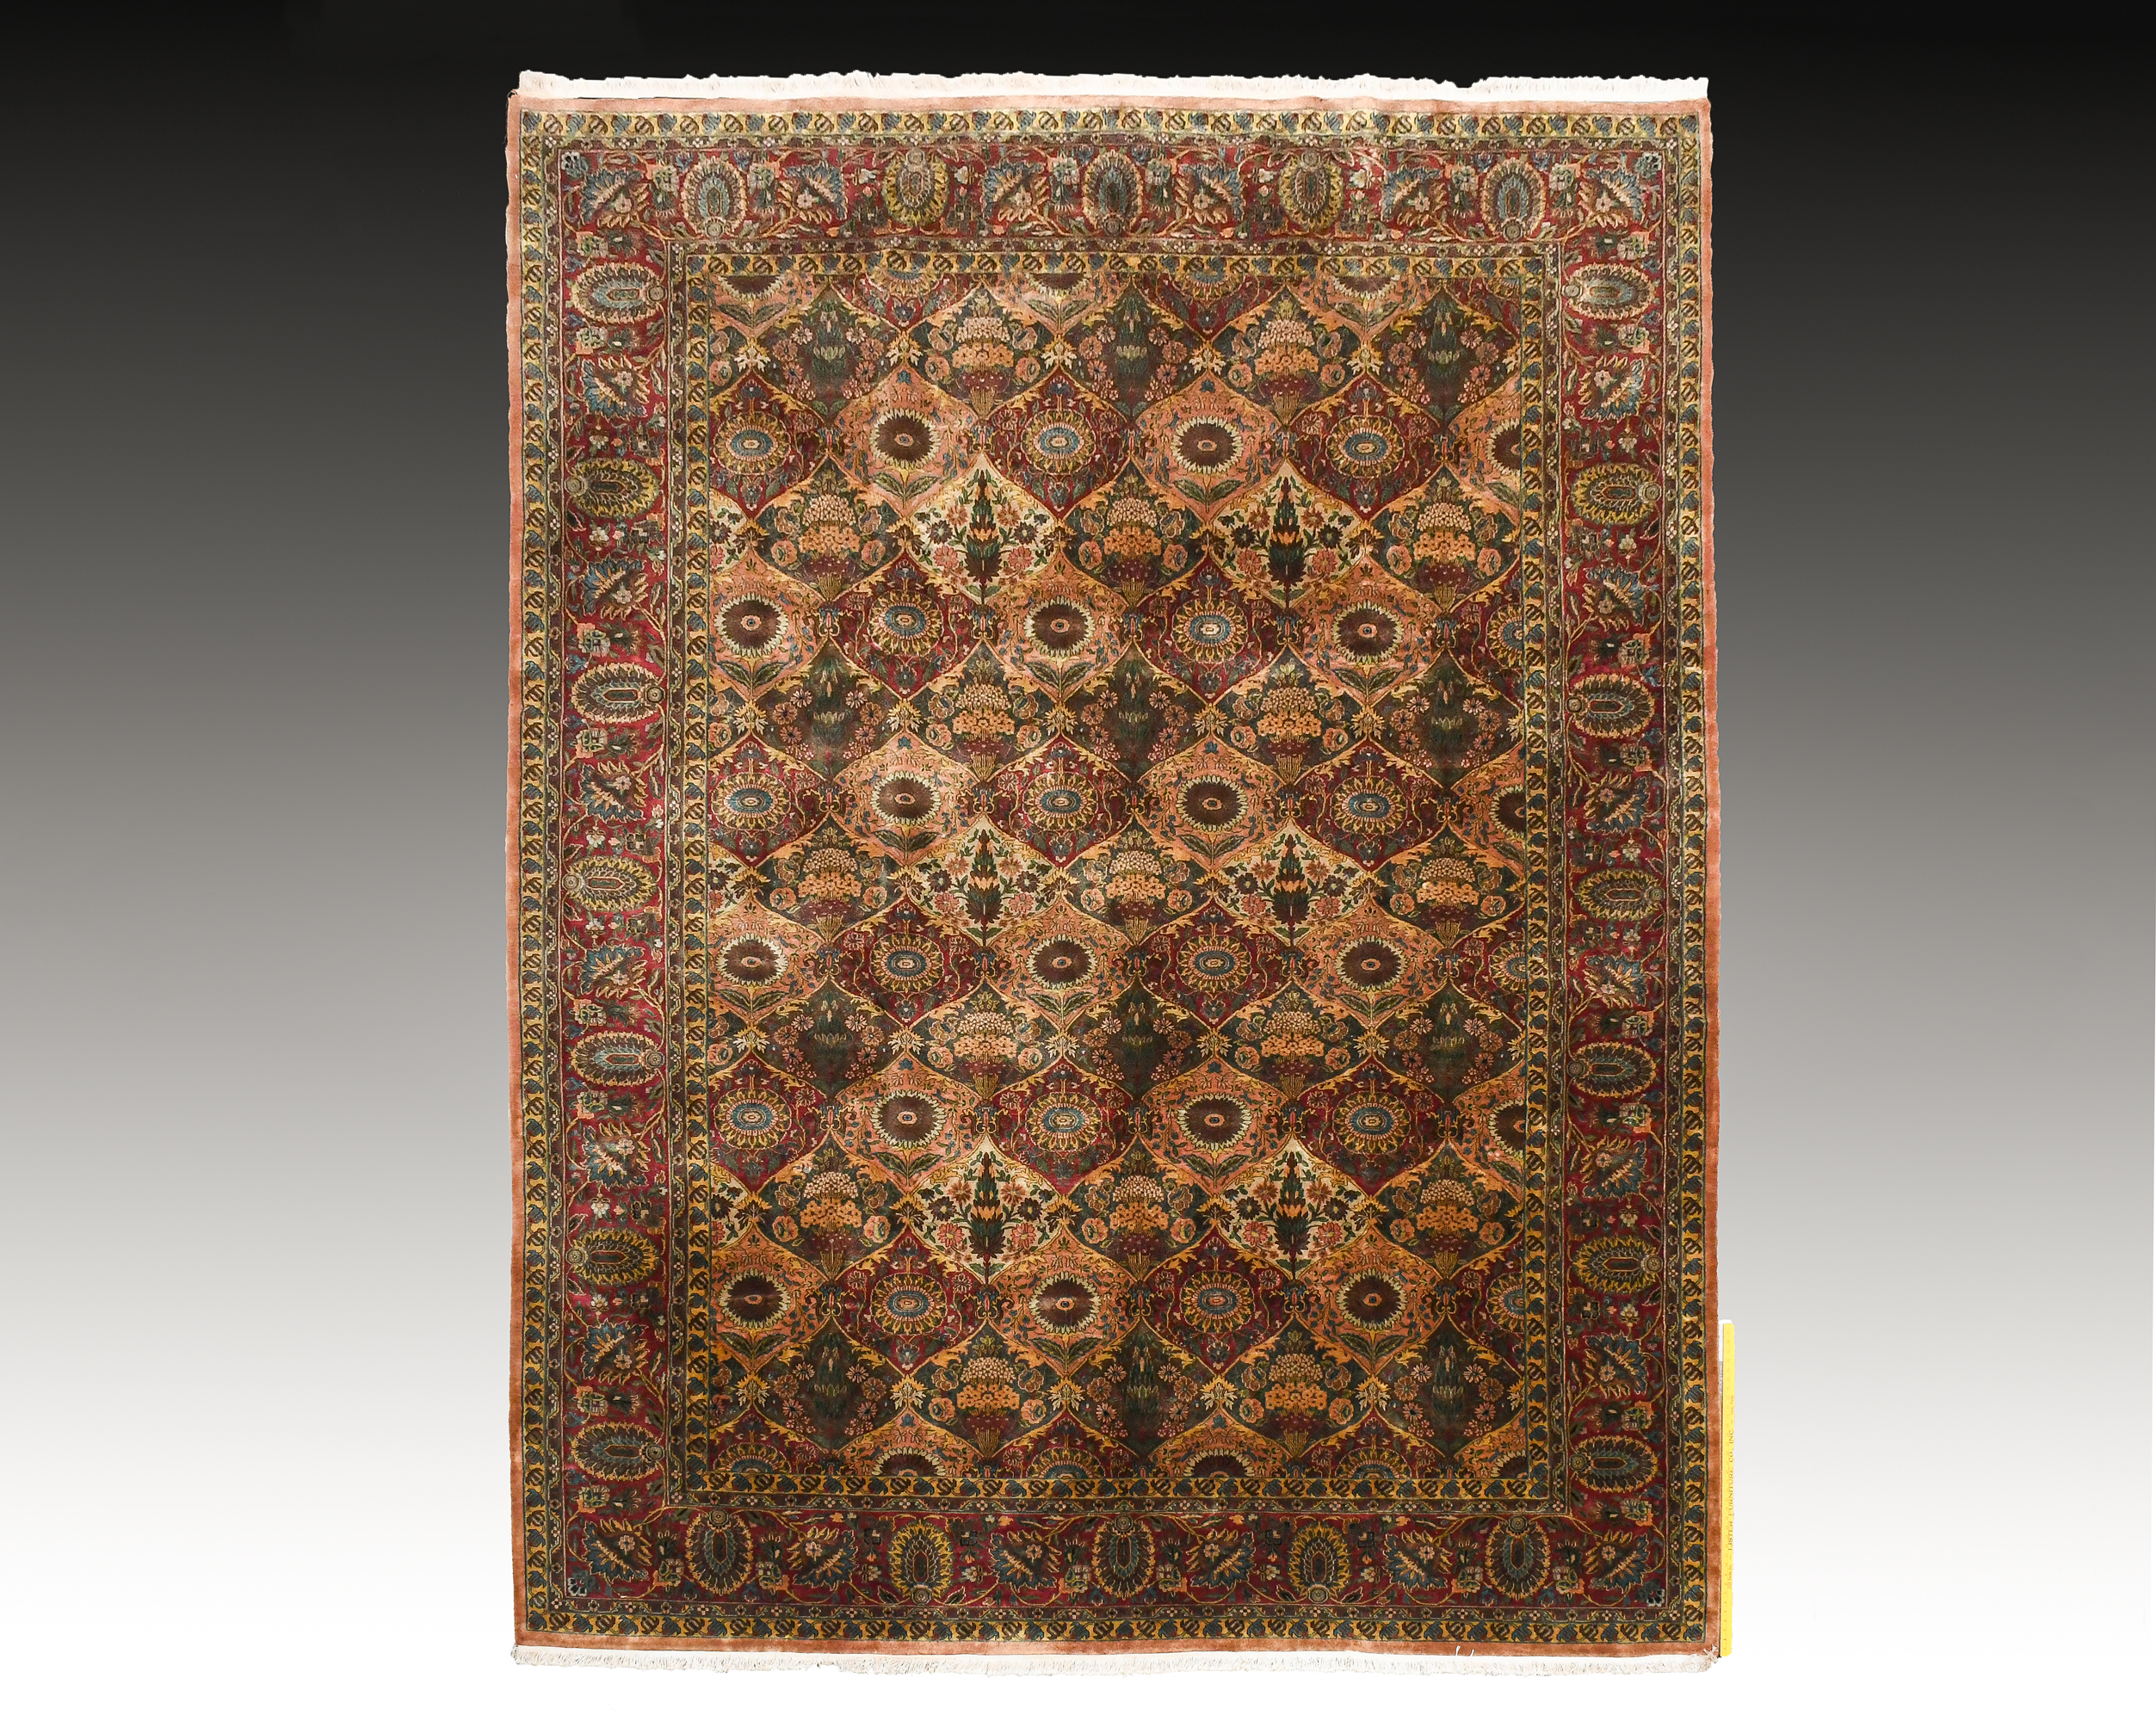 HAND KNOTTED WOOL RUG, 10' X 13'10'':